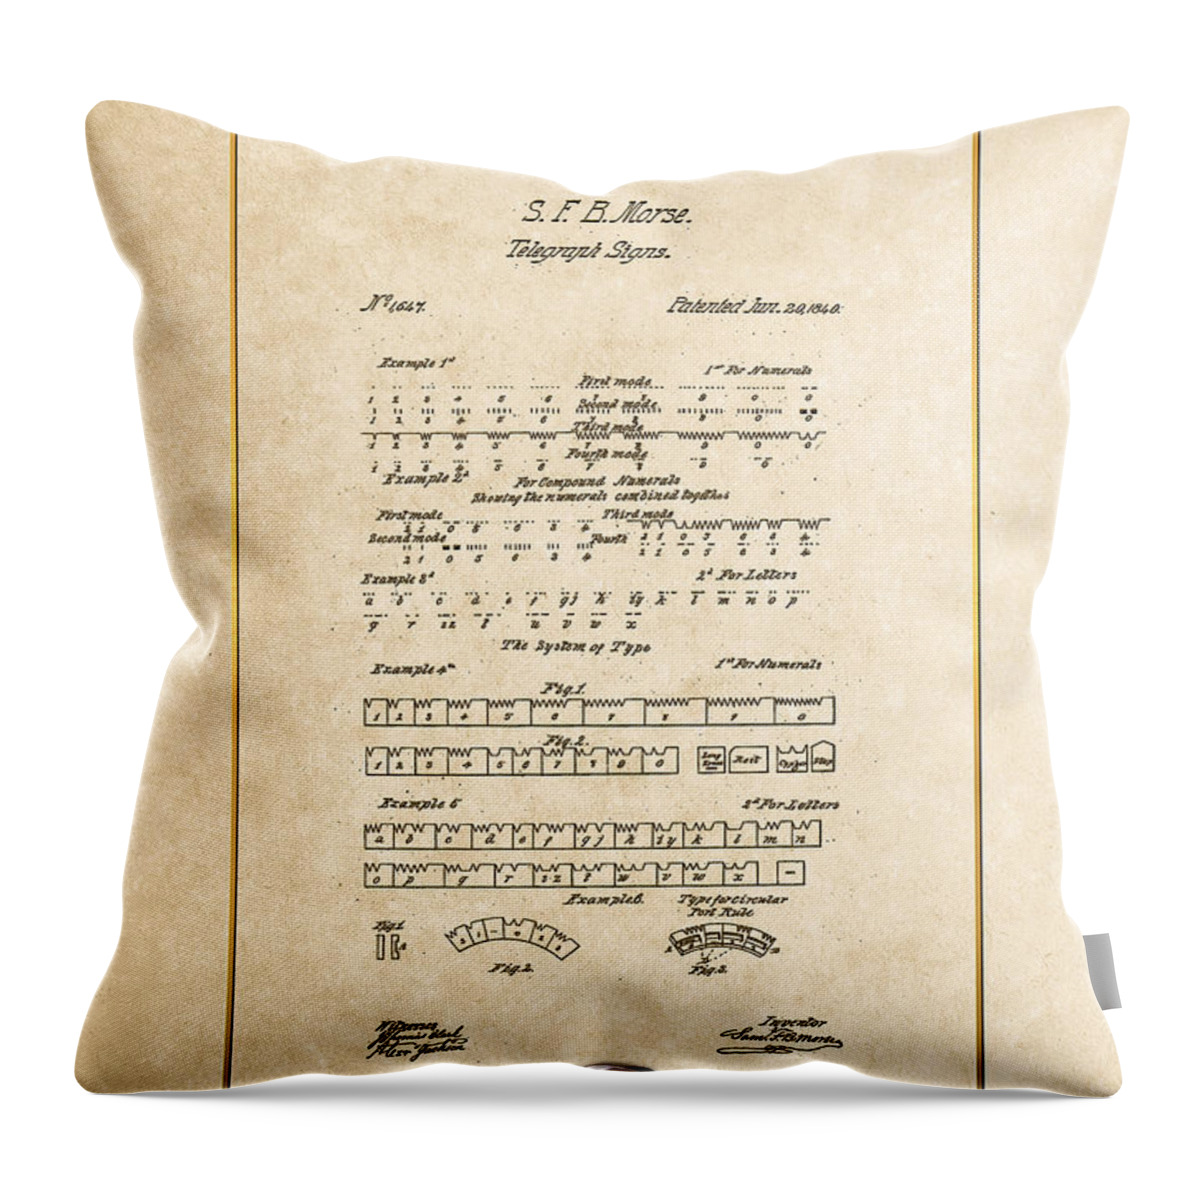 C7 Vintage Patents And Blueprints Throw Pillow featuring the digital art Telegraph Signs by S.F.B. Morse - Morse Code - Vintage Patent Document by Serge Averbukh